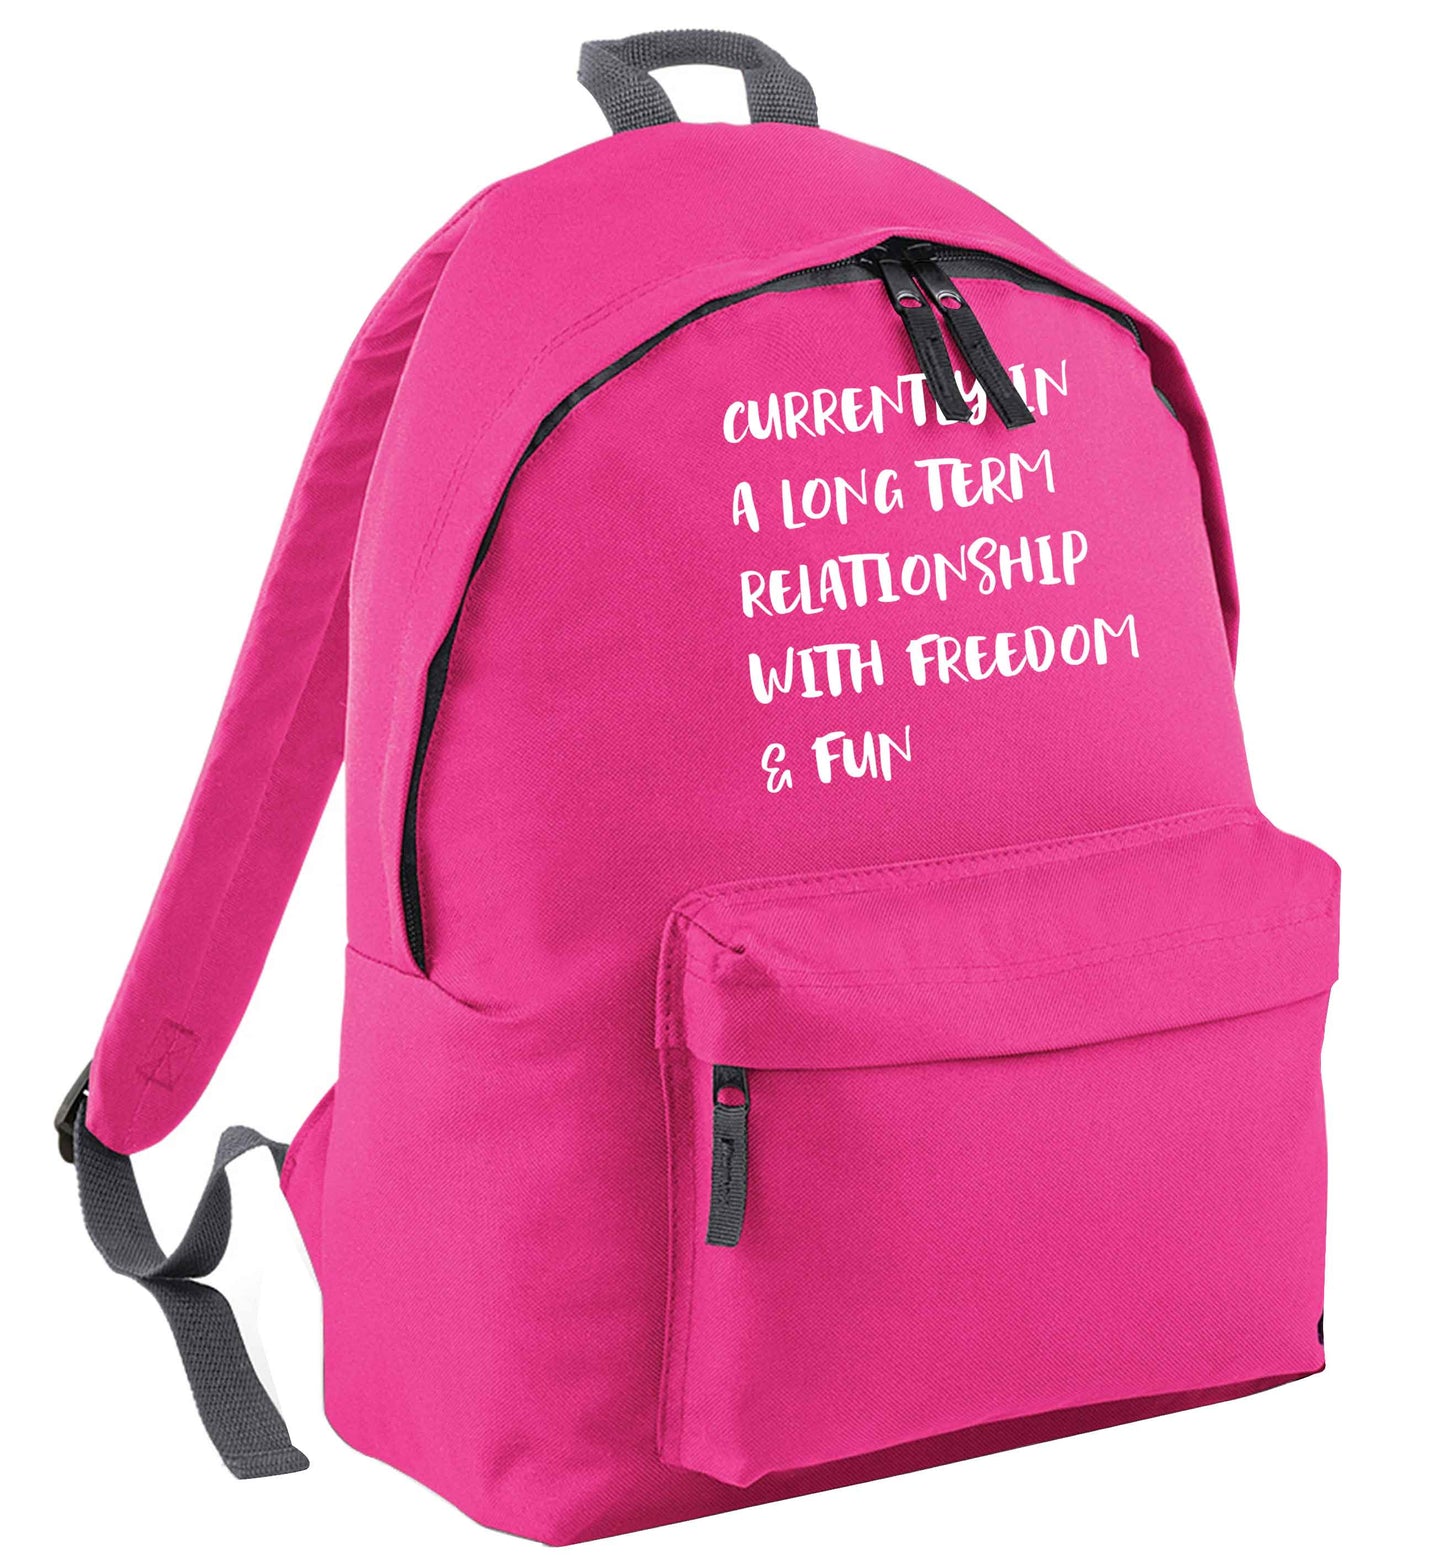 Currently in a long term relationship with freedom and fun pink adults backpack